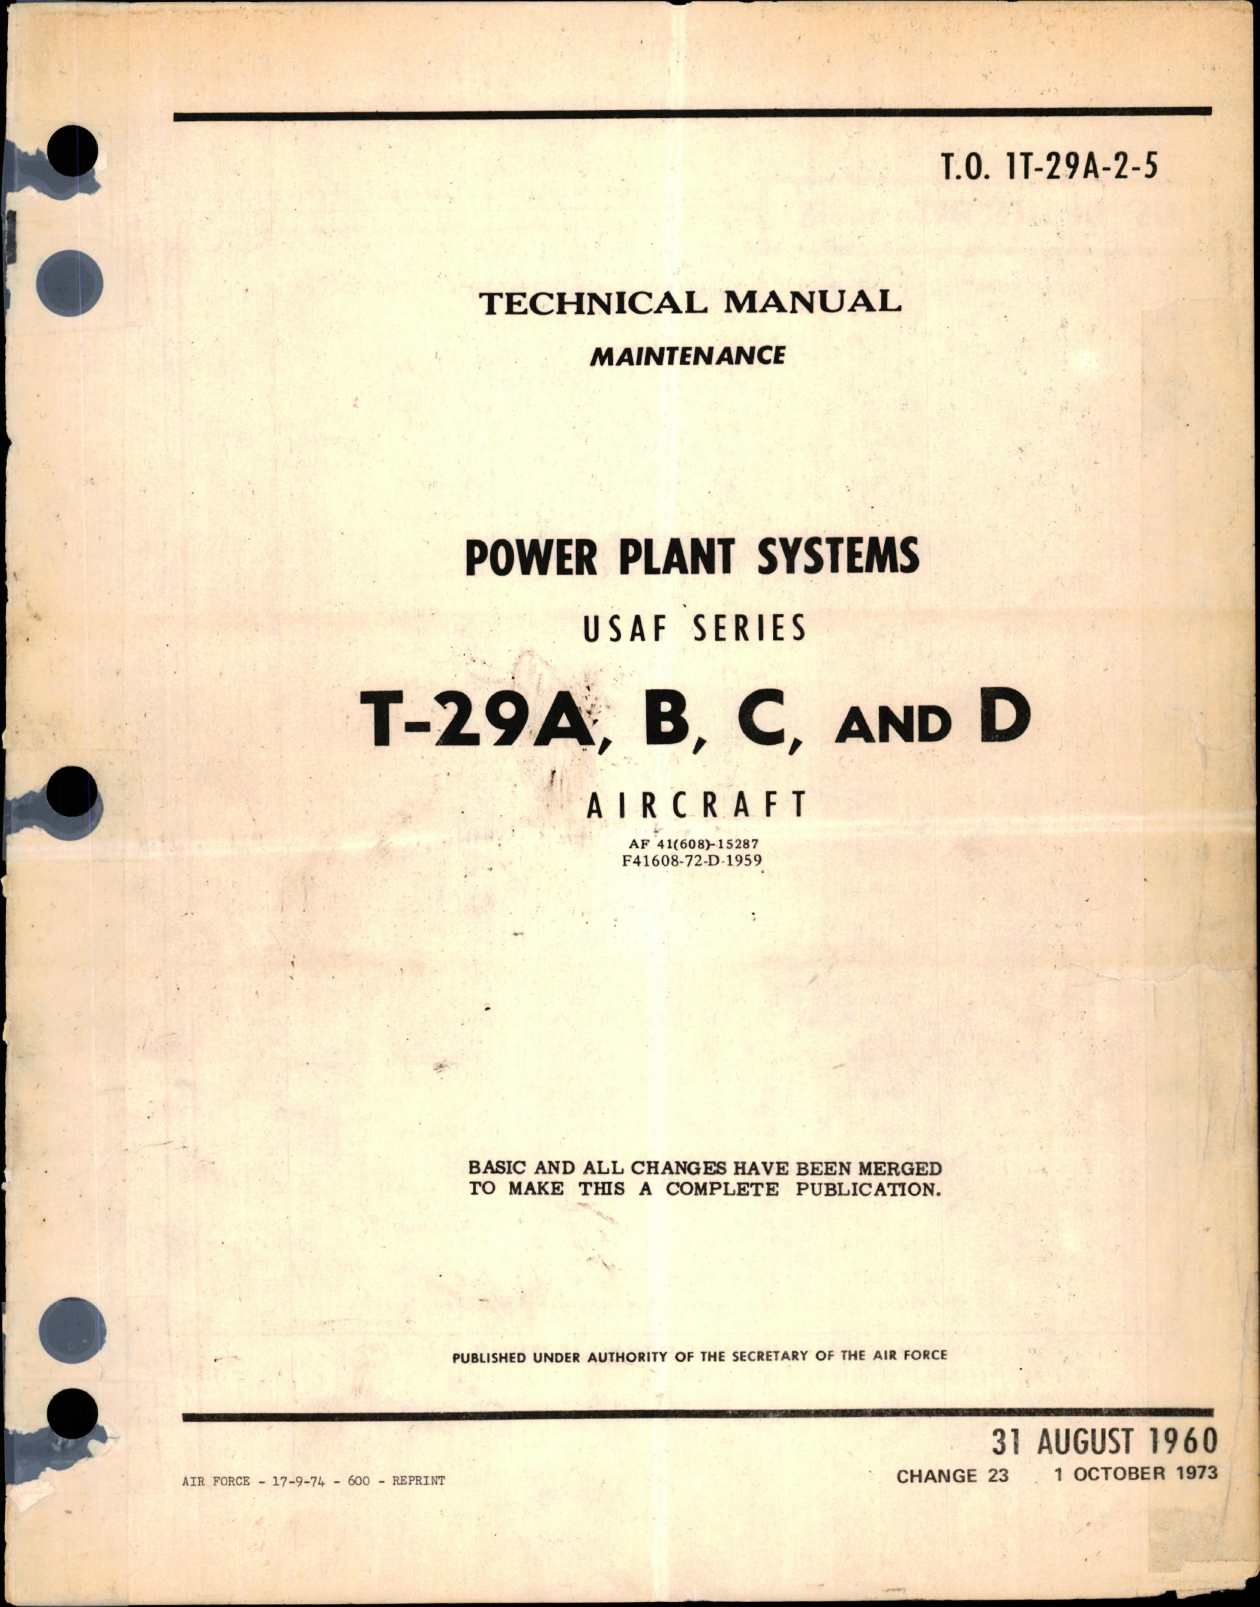 Sample page 1 from AirCorps Library document: Maintenance Manual for Power Plant Systems for T-29A, T-29B, T-29C and T-29D